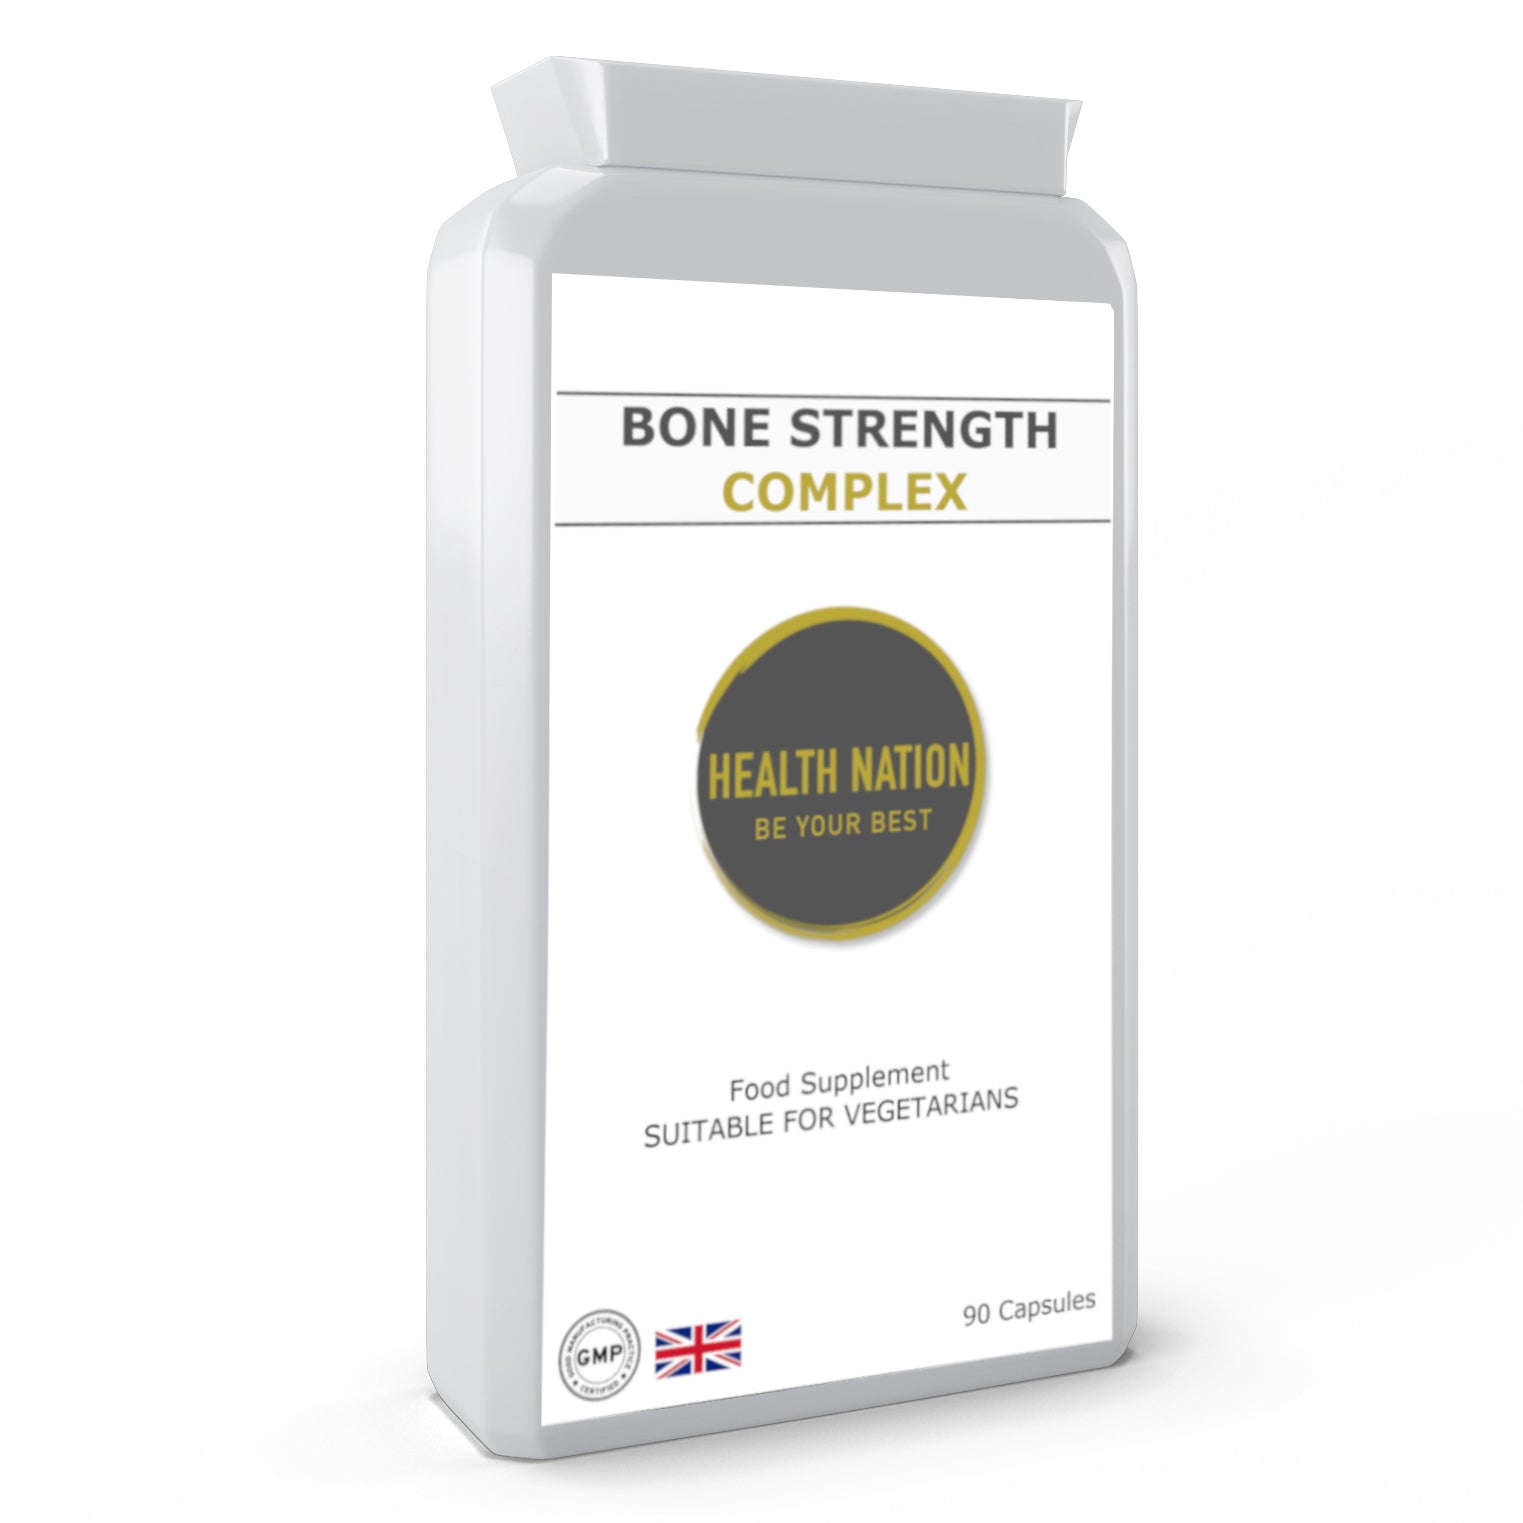 Bone Strength Complex | Helps with Bone Strength and Health | Made in UK | 90 Capsules - Health Nation